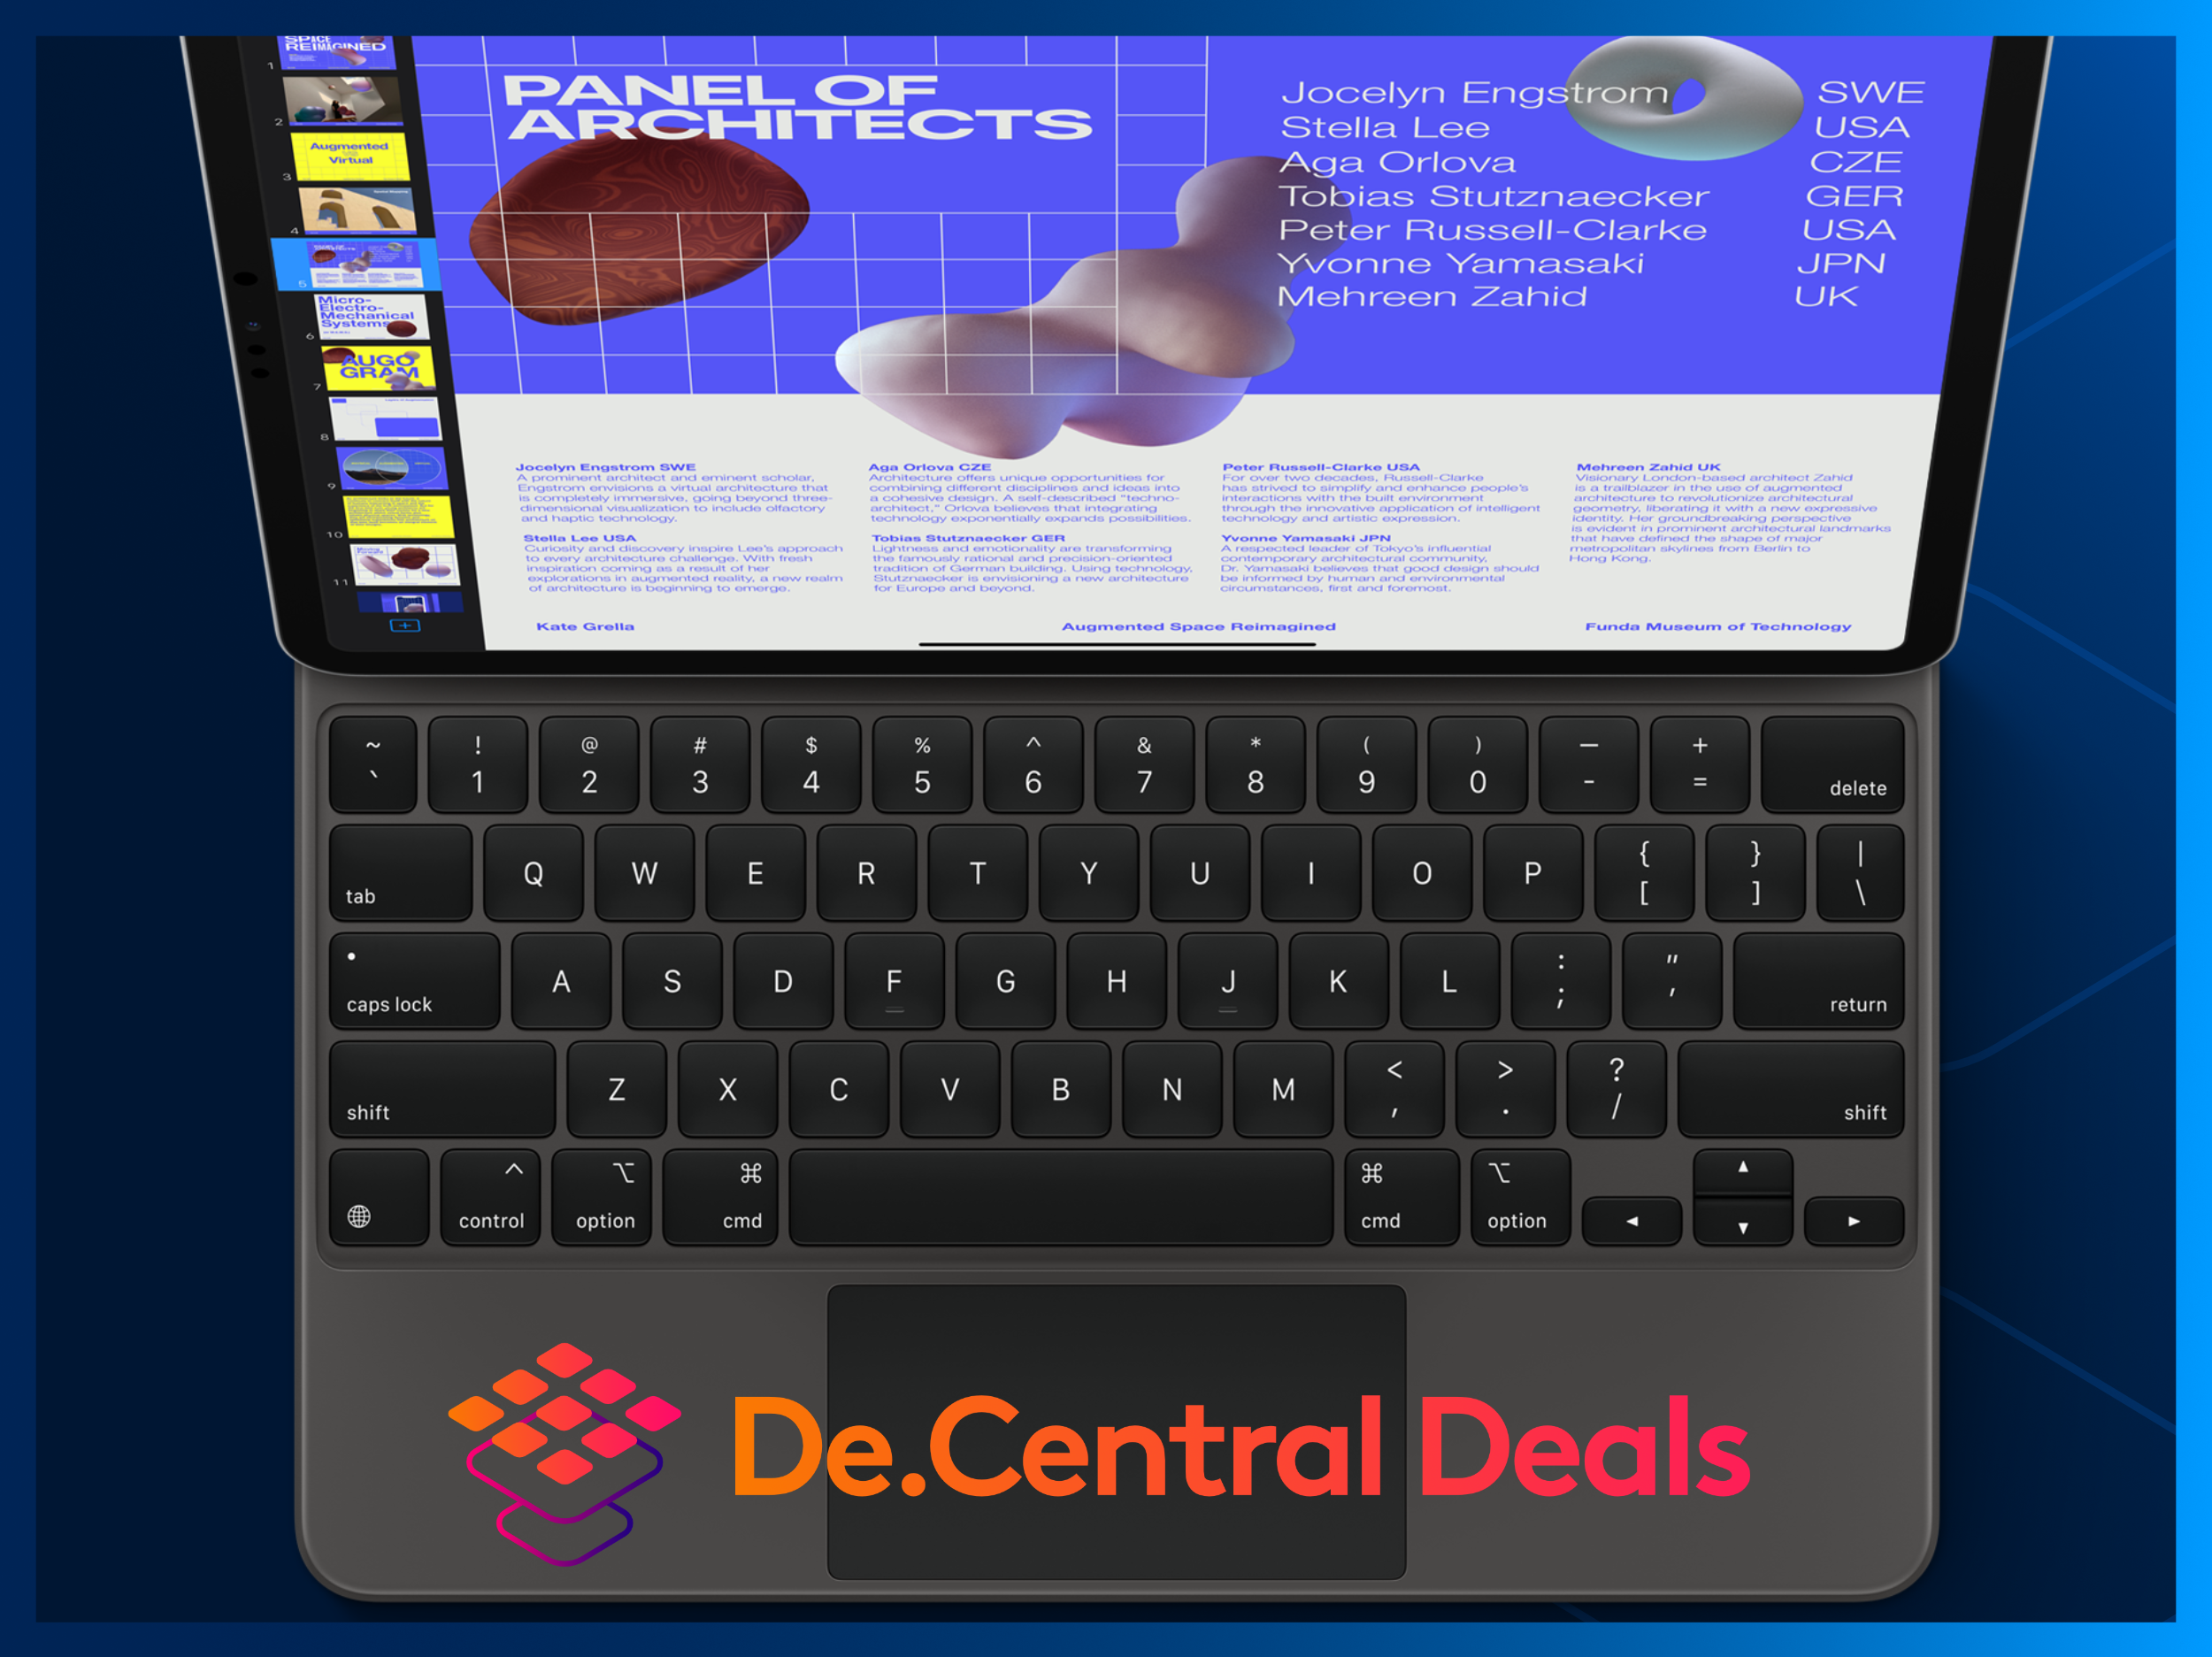 De.Central Deals | Save $184 on 11 inch iPad Pro and More